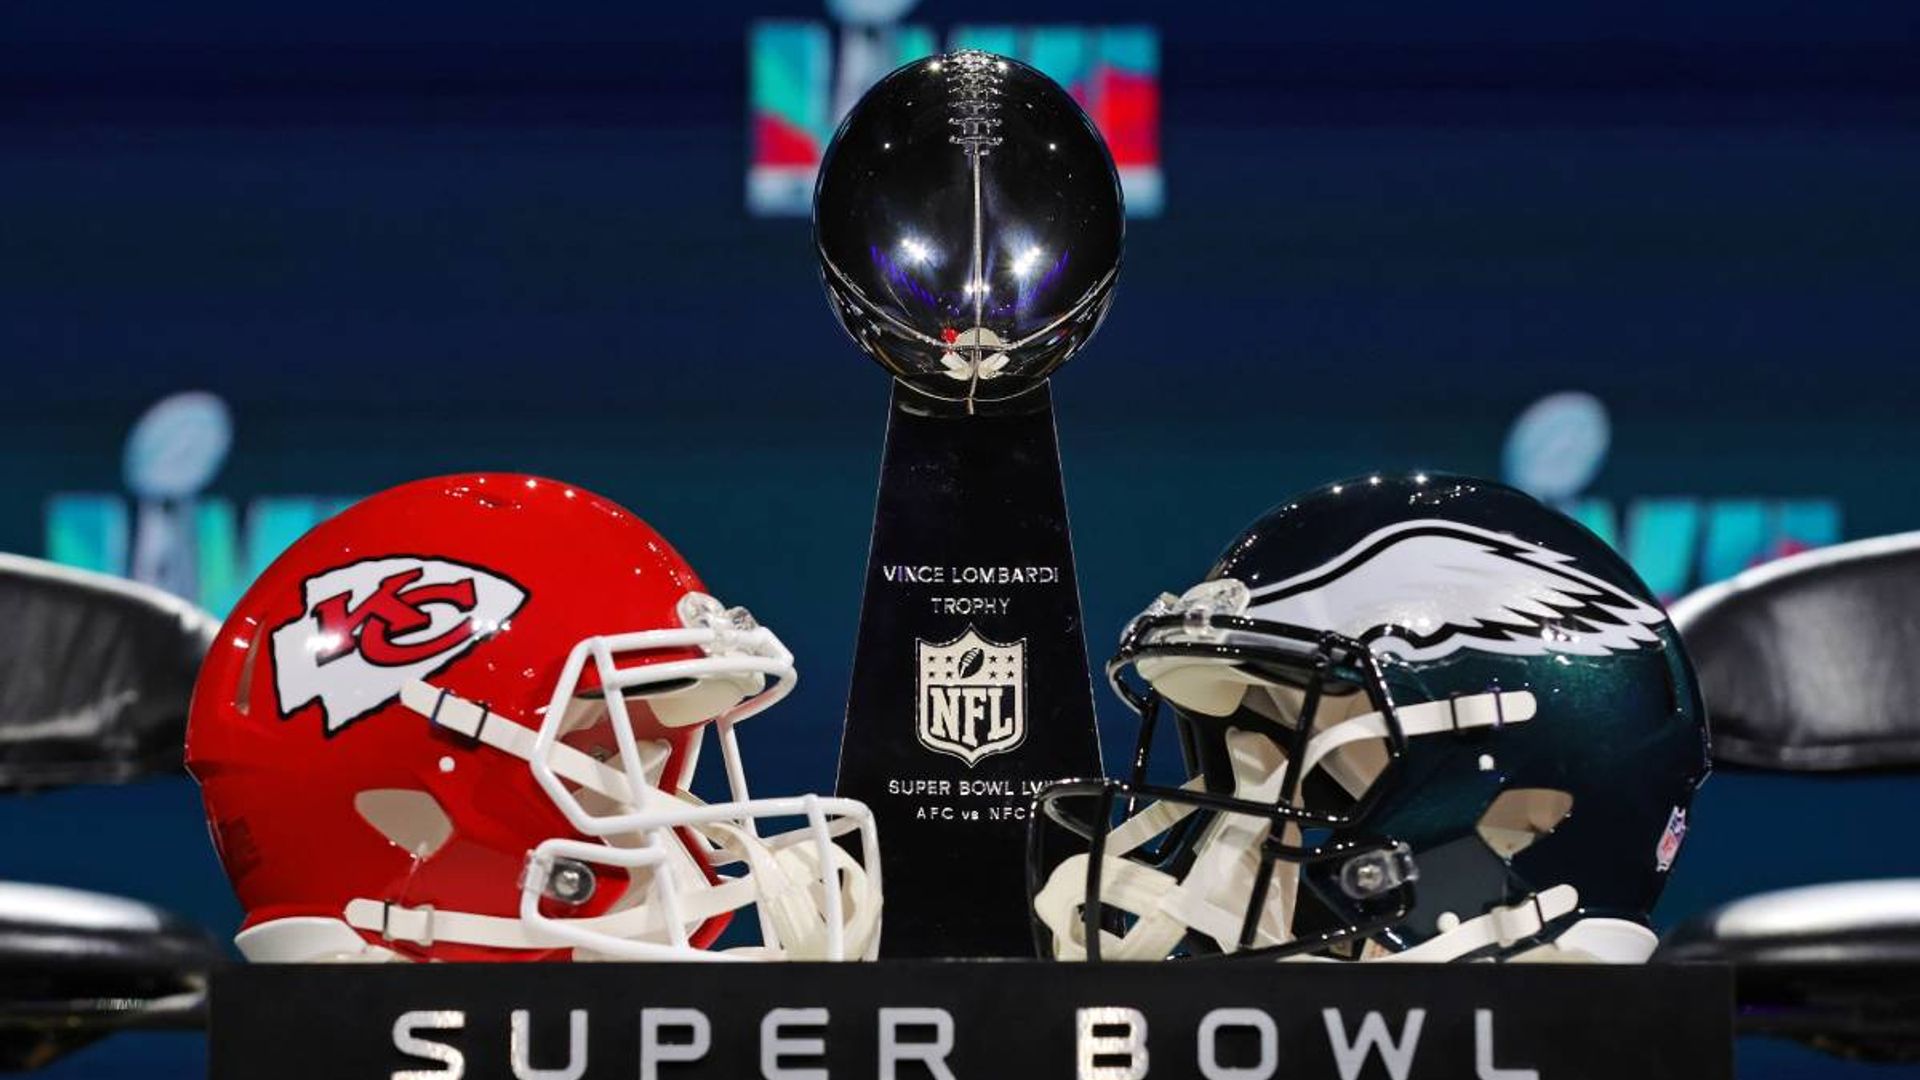 2020 Super Bowl teams: Which teams are playing in the Super Bowl?